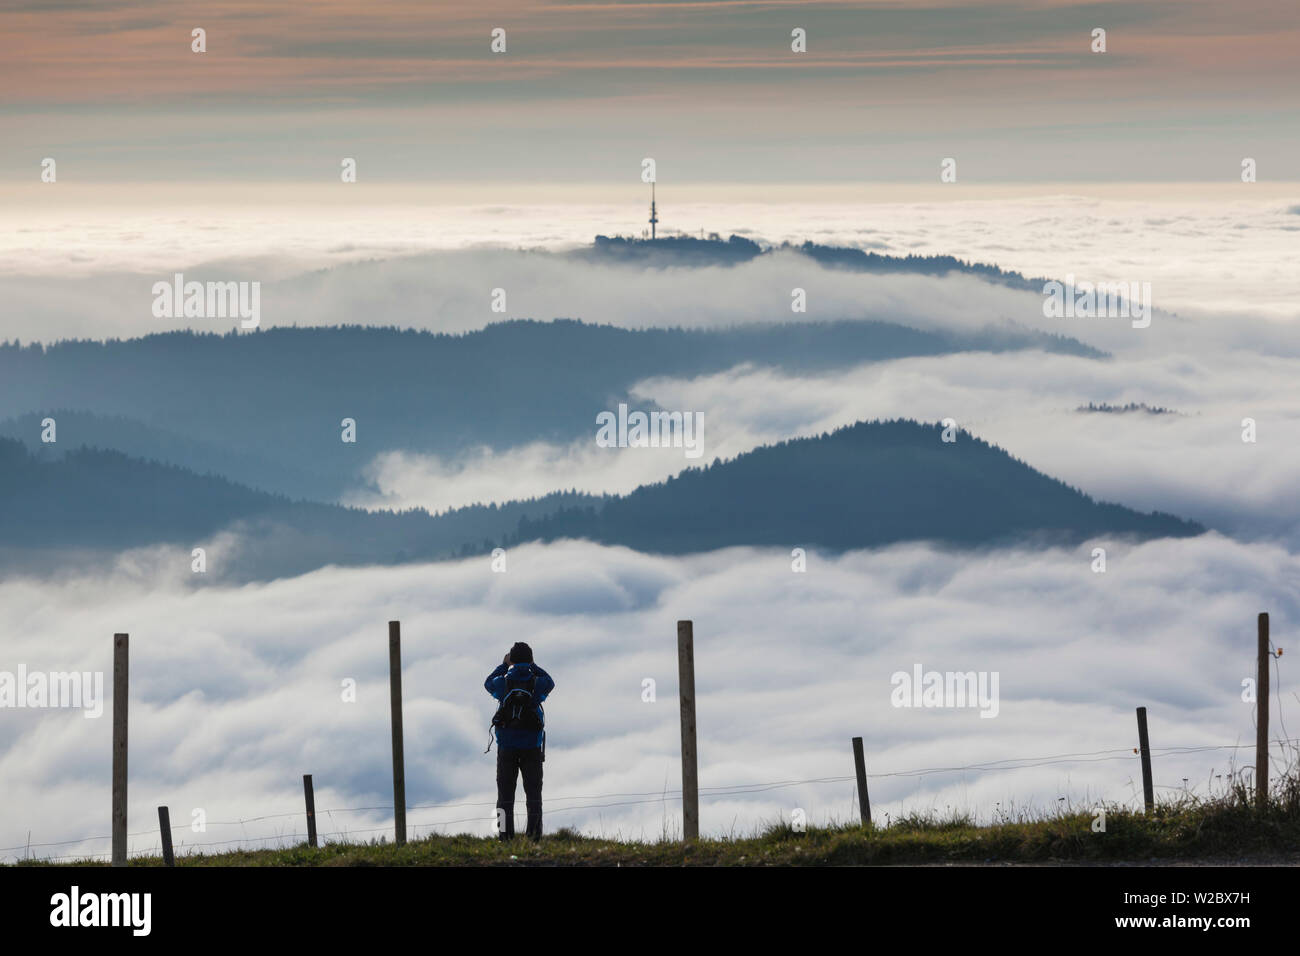 Germany, Baden-Wurttemburg, Black Forest, Belchen Mountain, summit view with evening fog and person Stock Photo